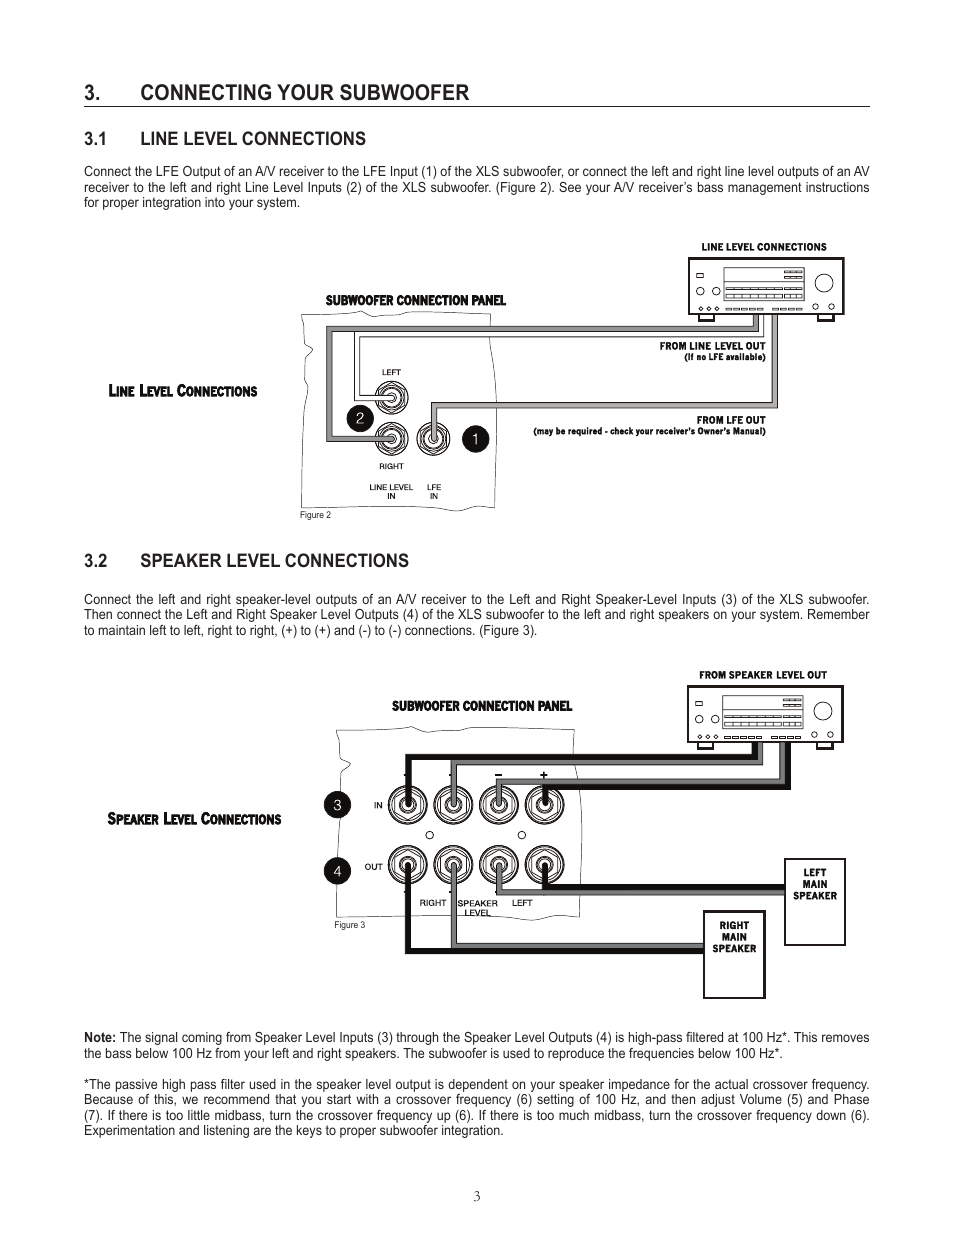 Connecting your subwoofer | Cerwin-Vega SUBWOOFERS XLS-12S User Manual |  Page 6 / 8